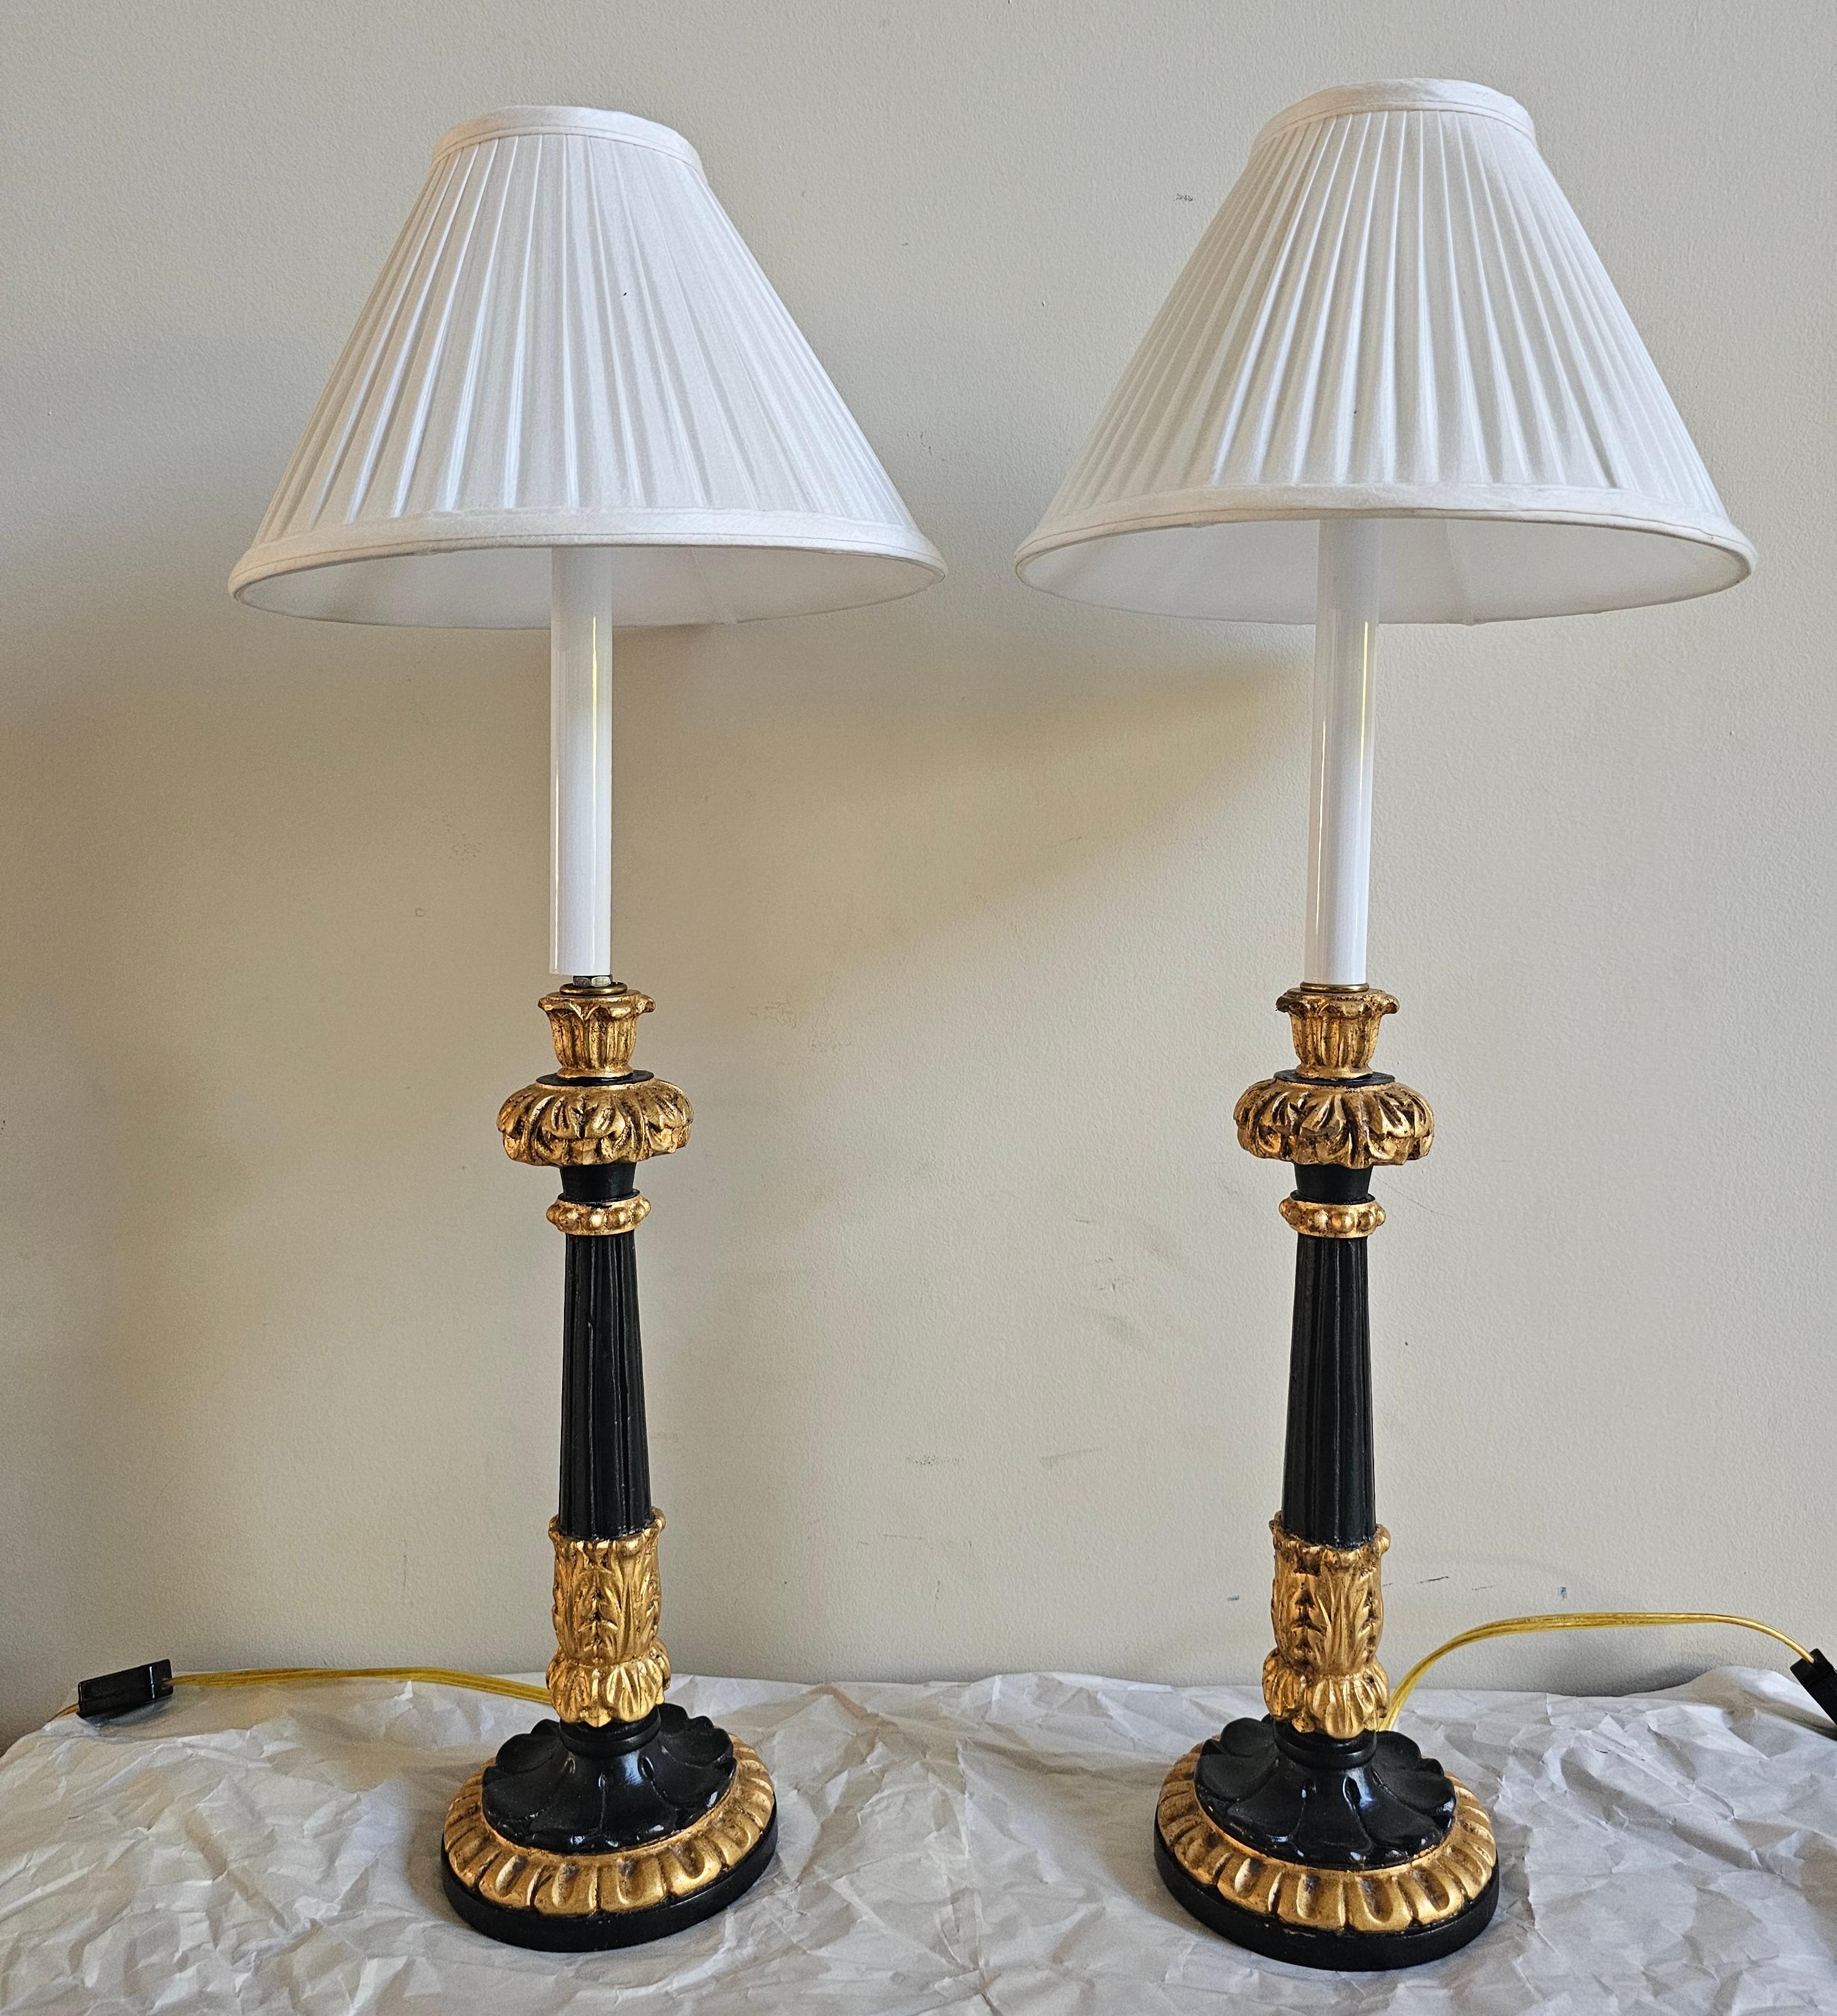 An exquisite Pair of Charles X St. Giltwood And Black ebonized Enamel Candlesticks Mounted As Lamps. Measure 5.5